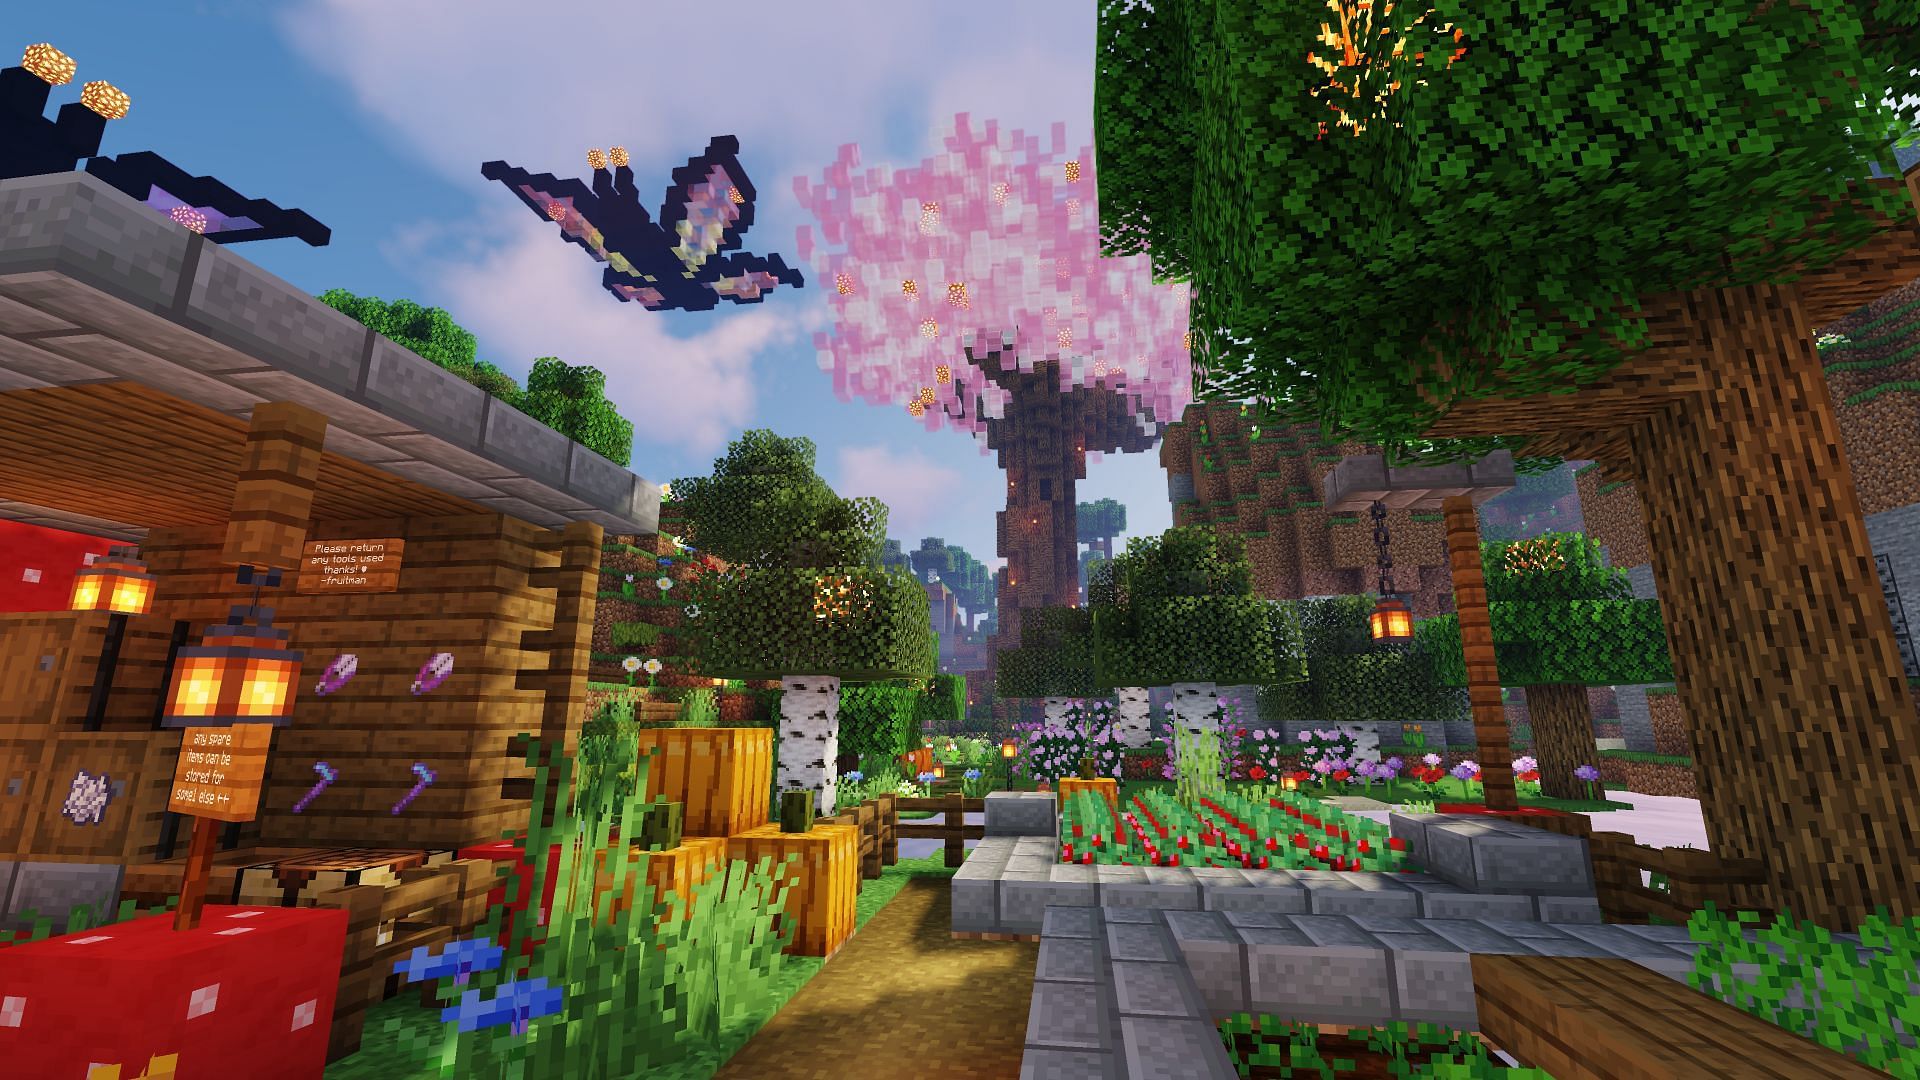 TogetherCraft is one of the best Minecraft vanilla servers. (Image credits: TogetherCraft)